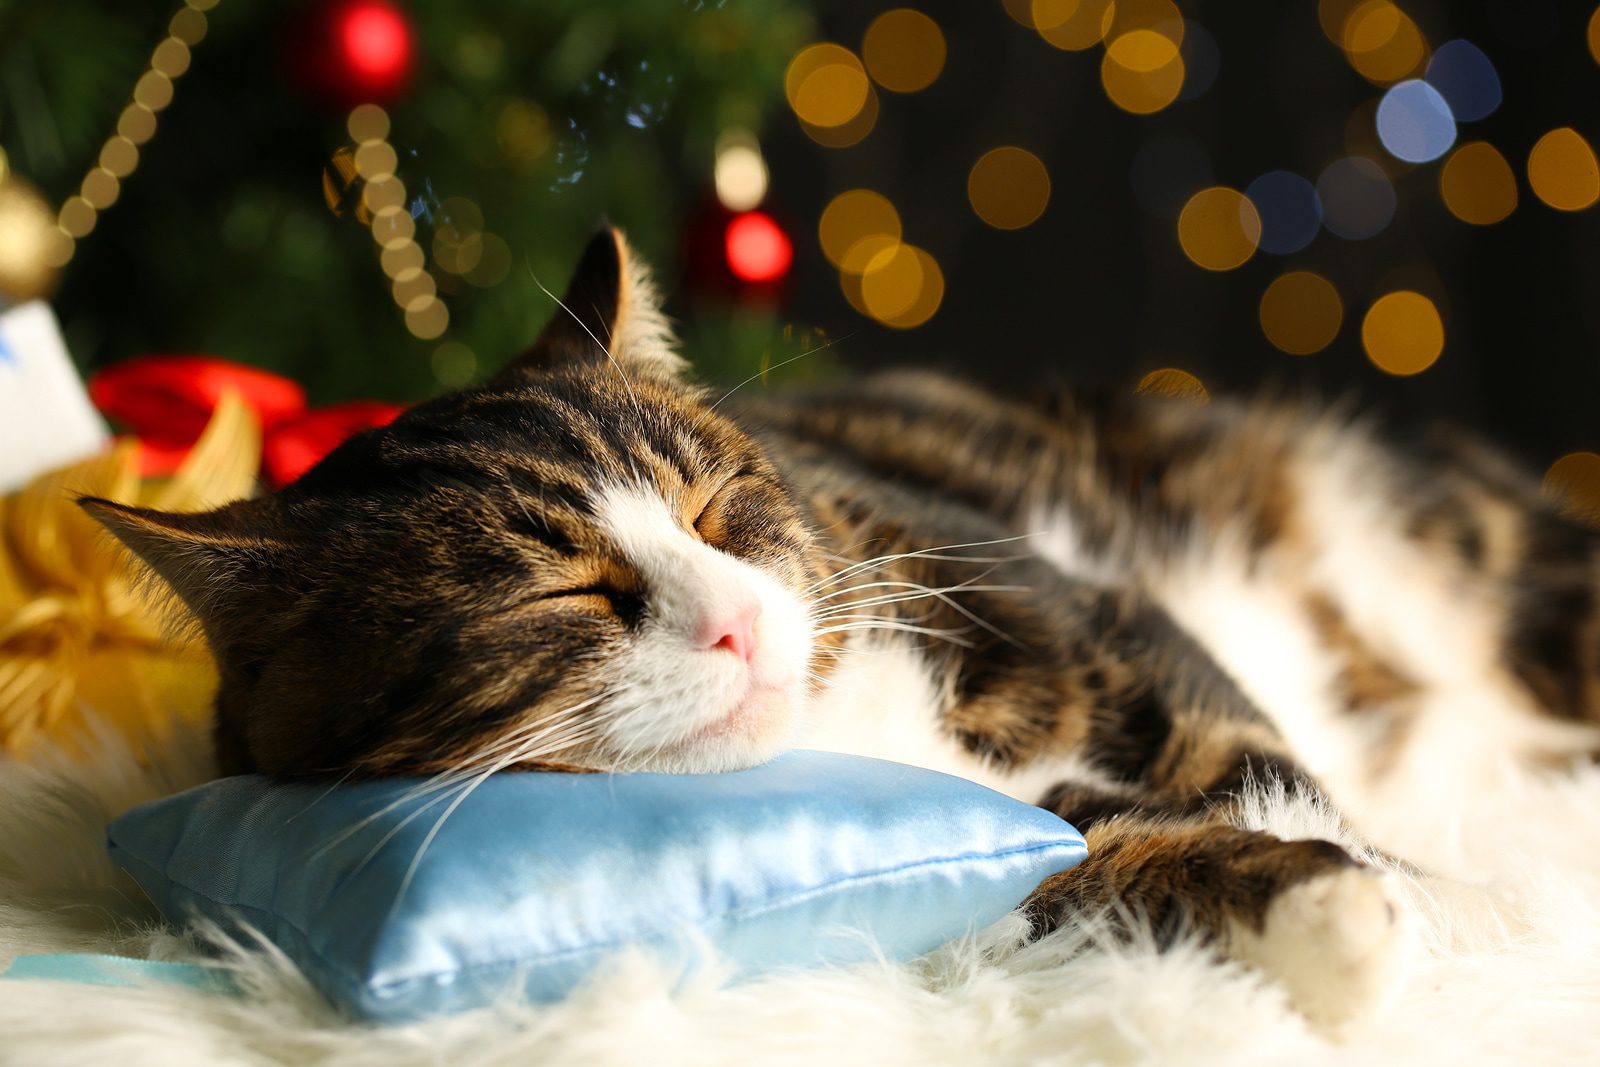 How to celebrate holidays if the cat is afraid of noise